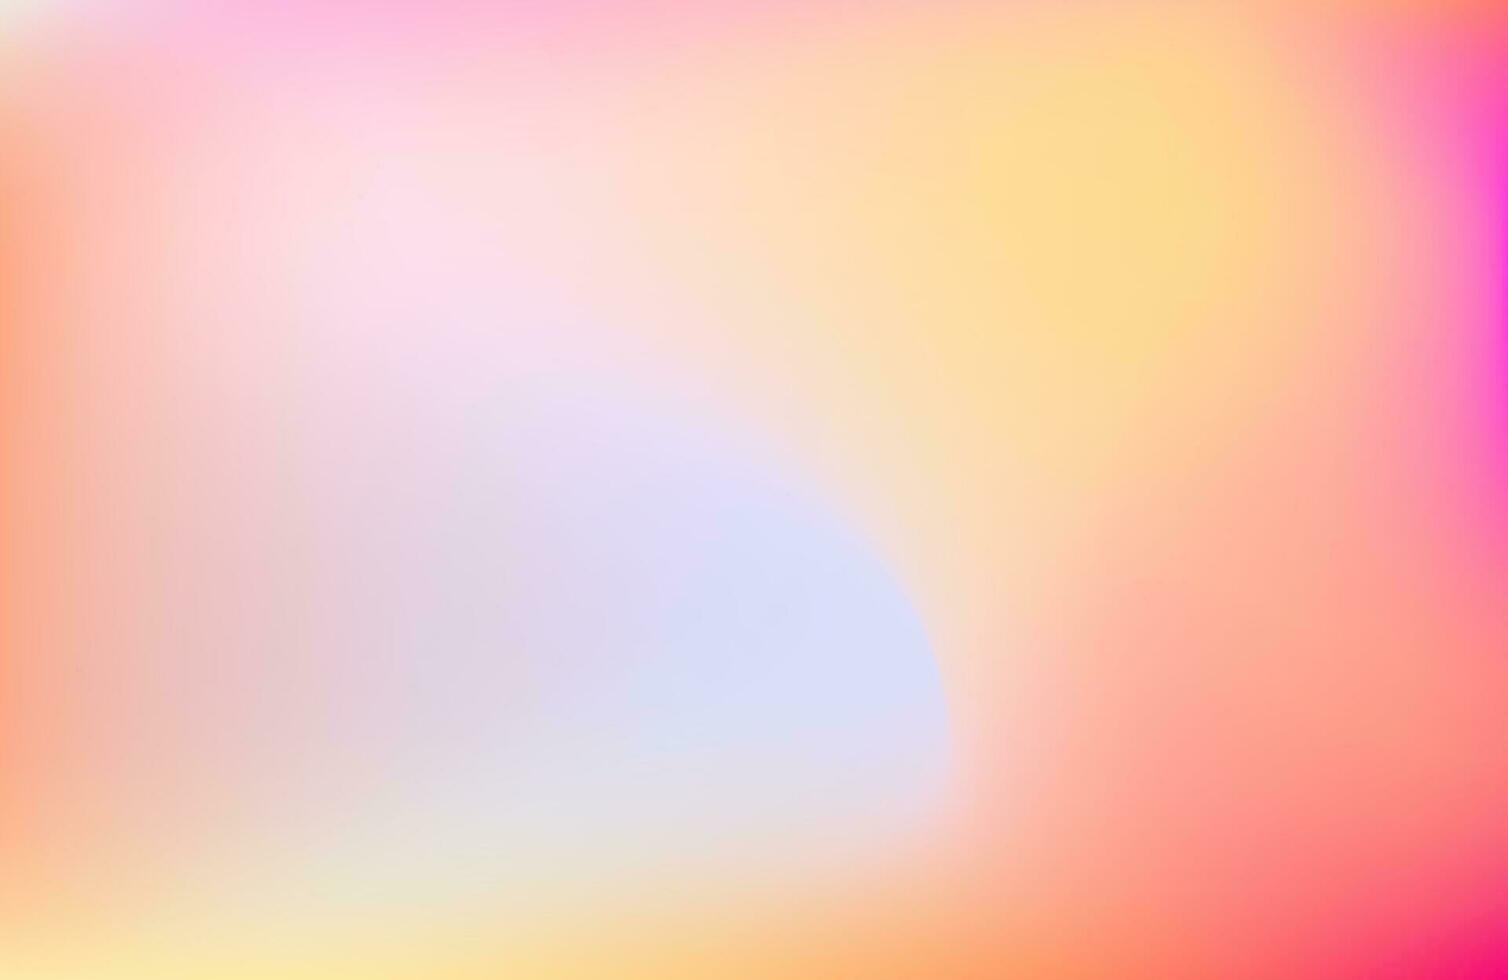 Colorful and vibrant vector liquid gradient background for web design and other